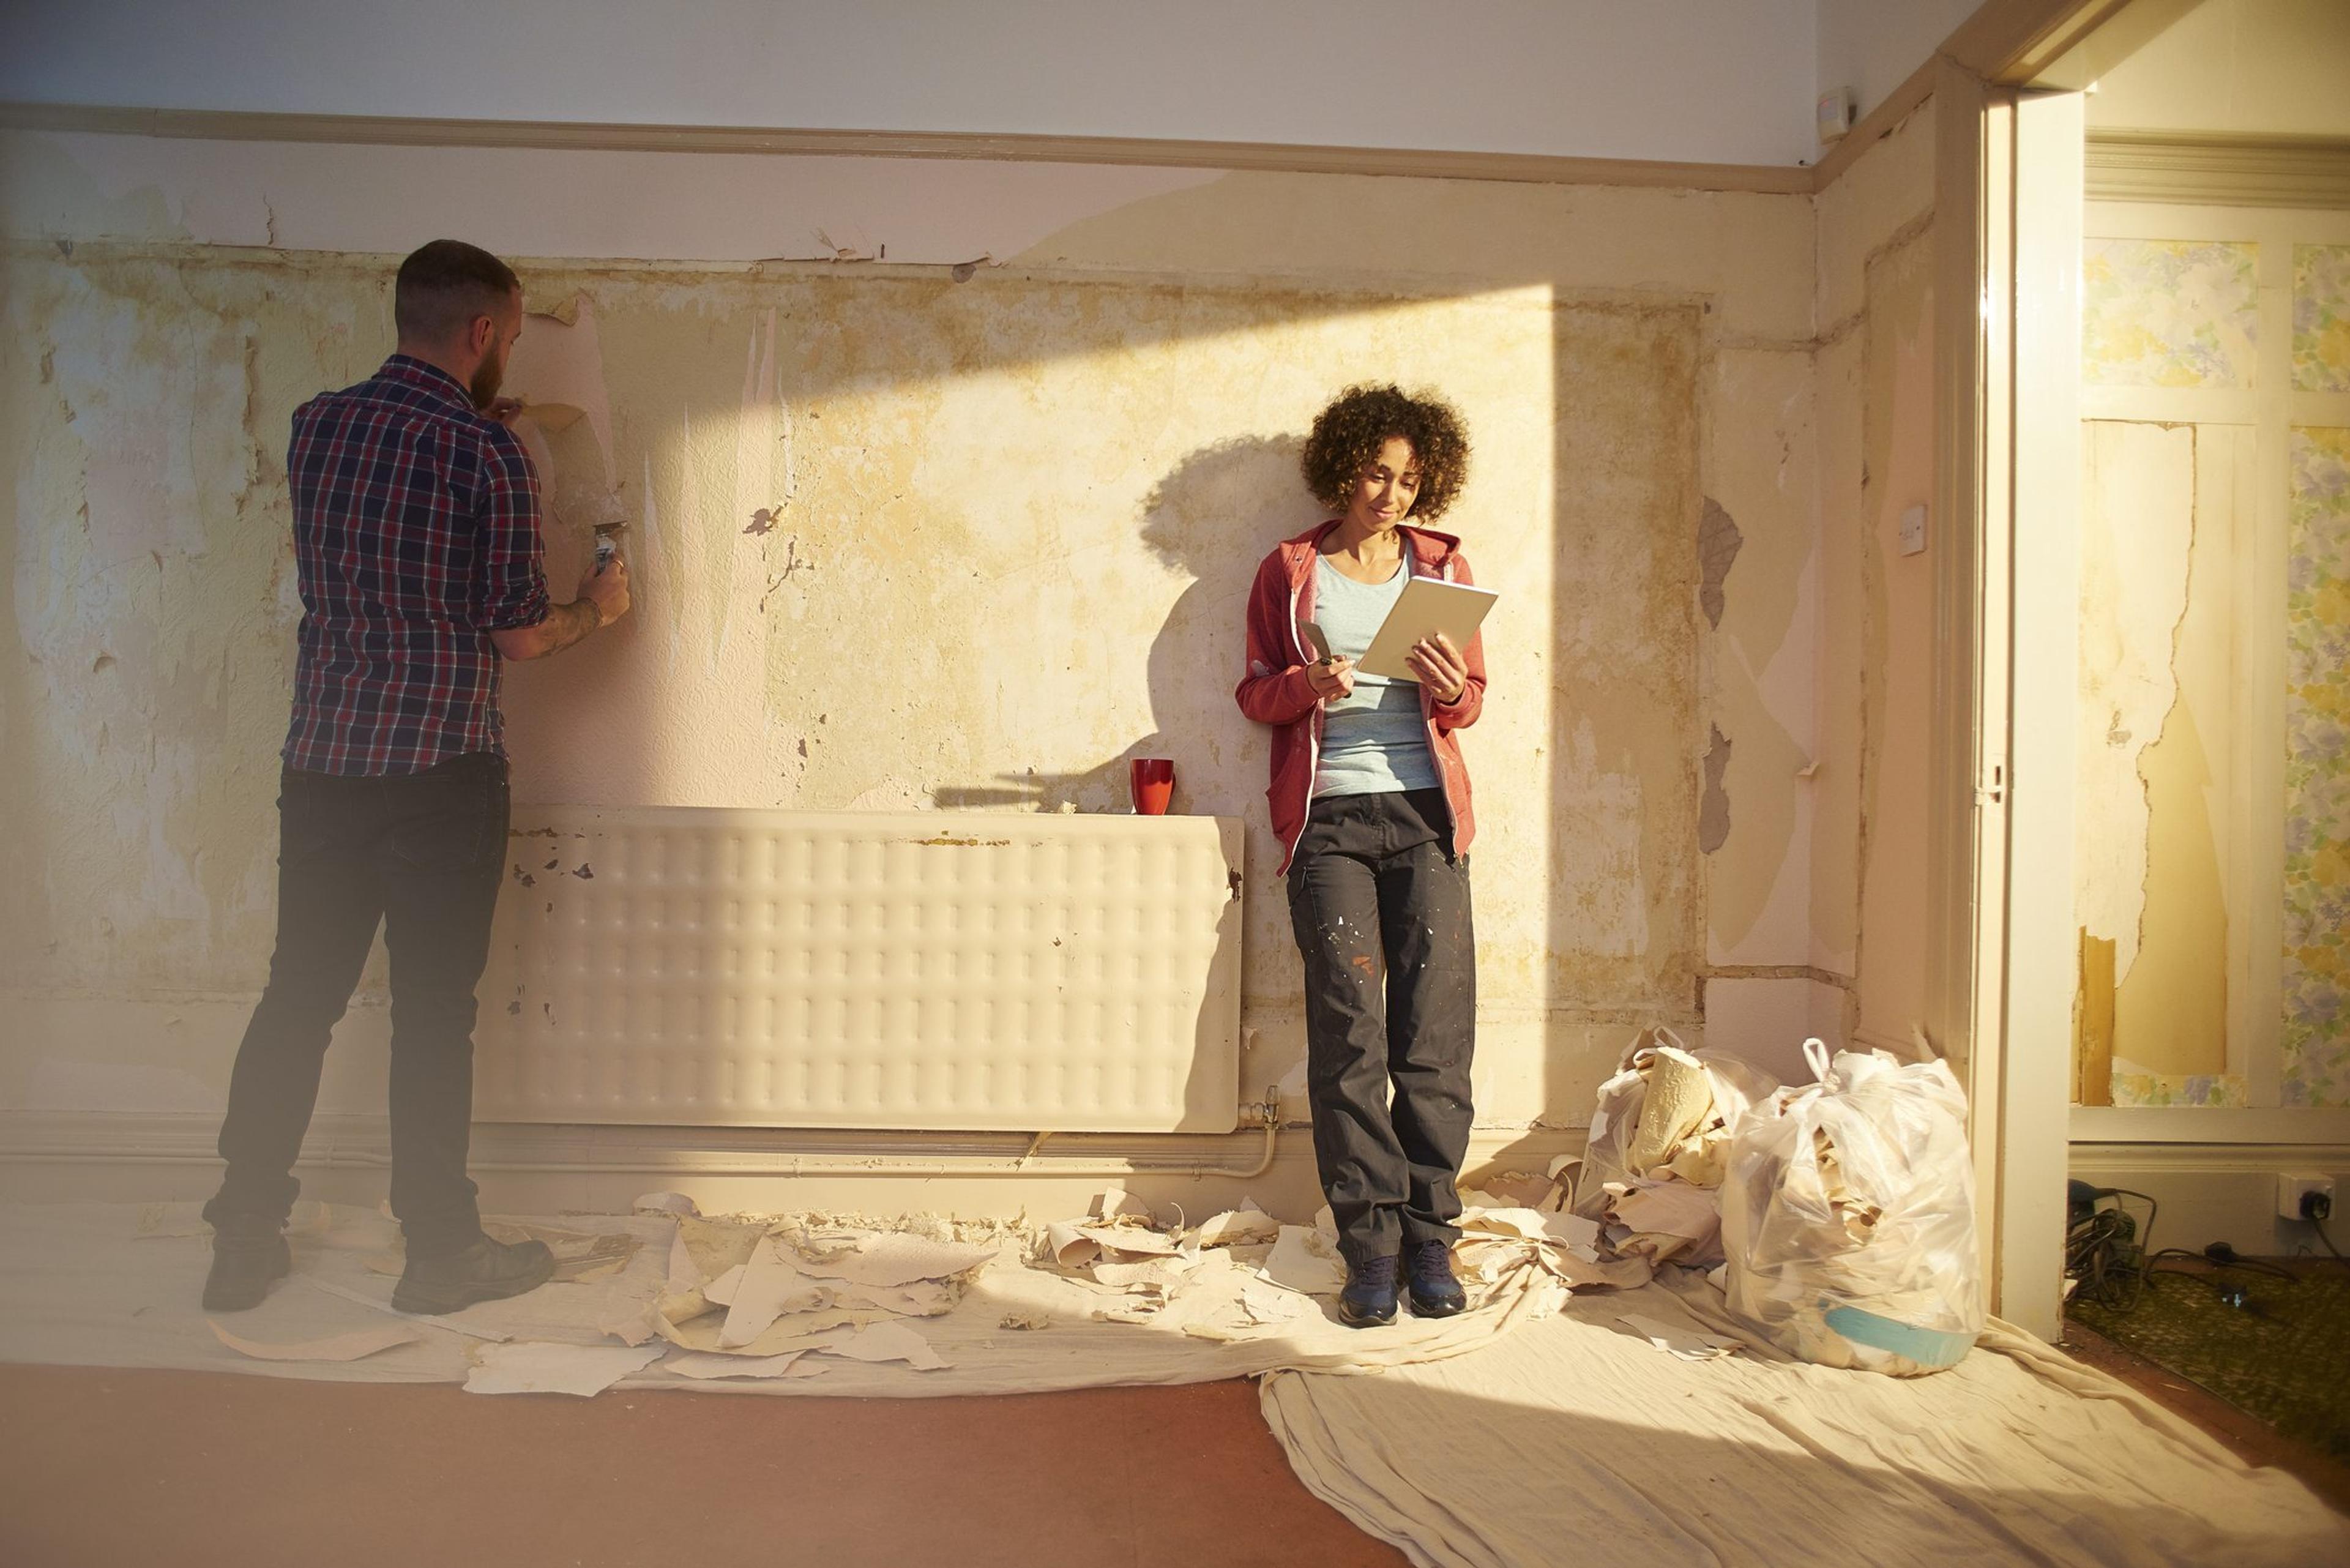 A couple is scraping paint off a wall in an old home